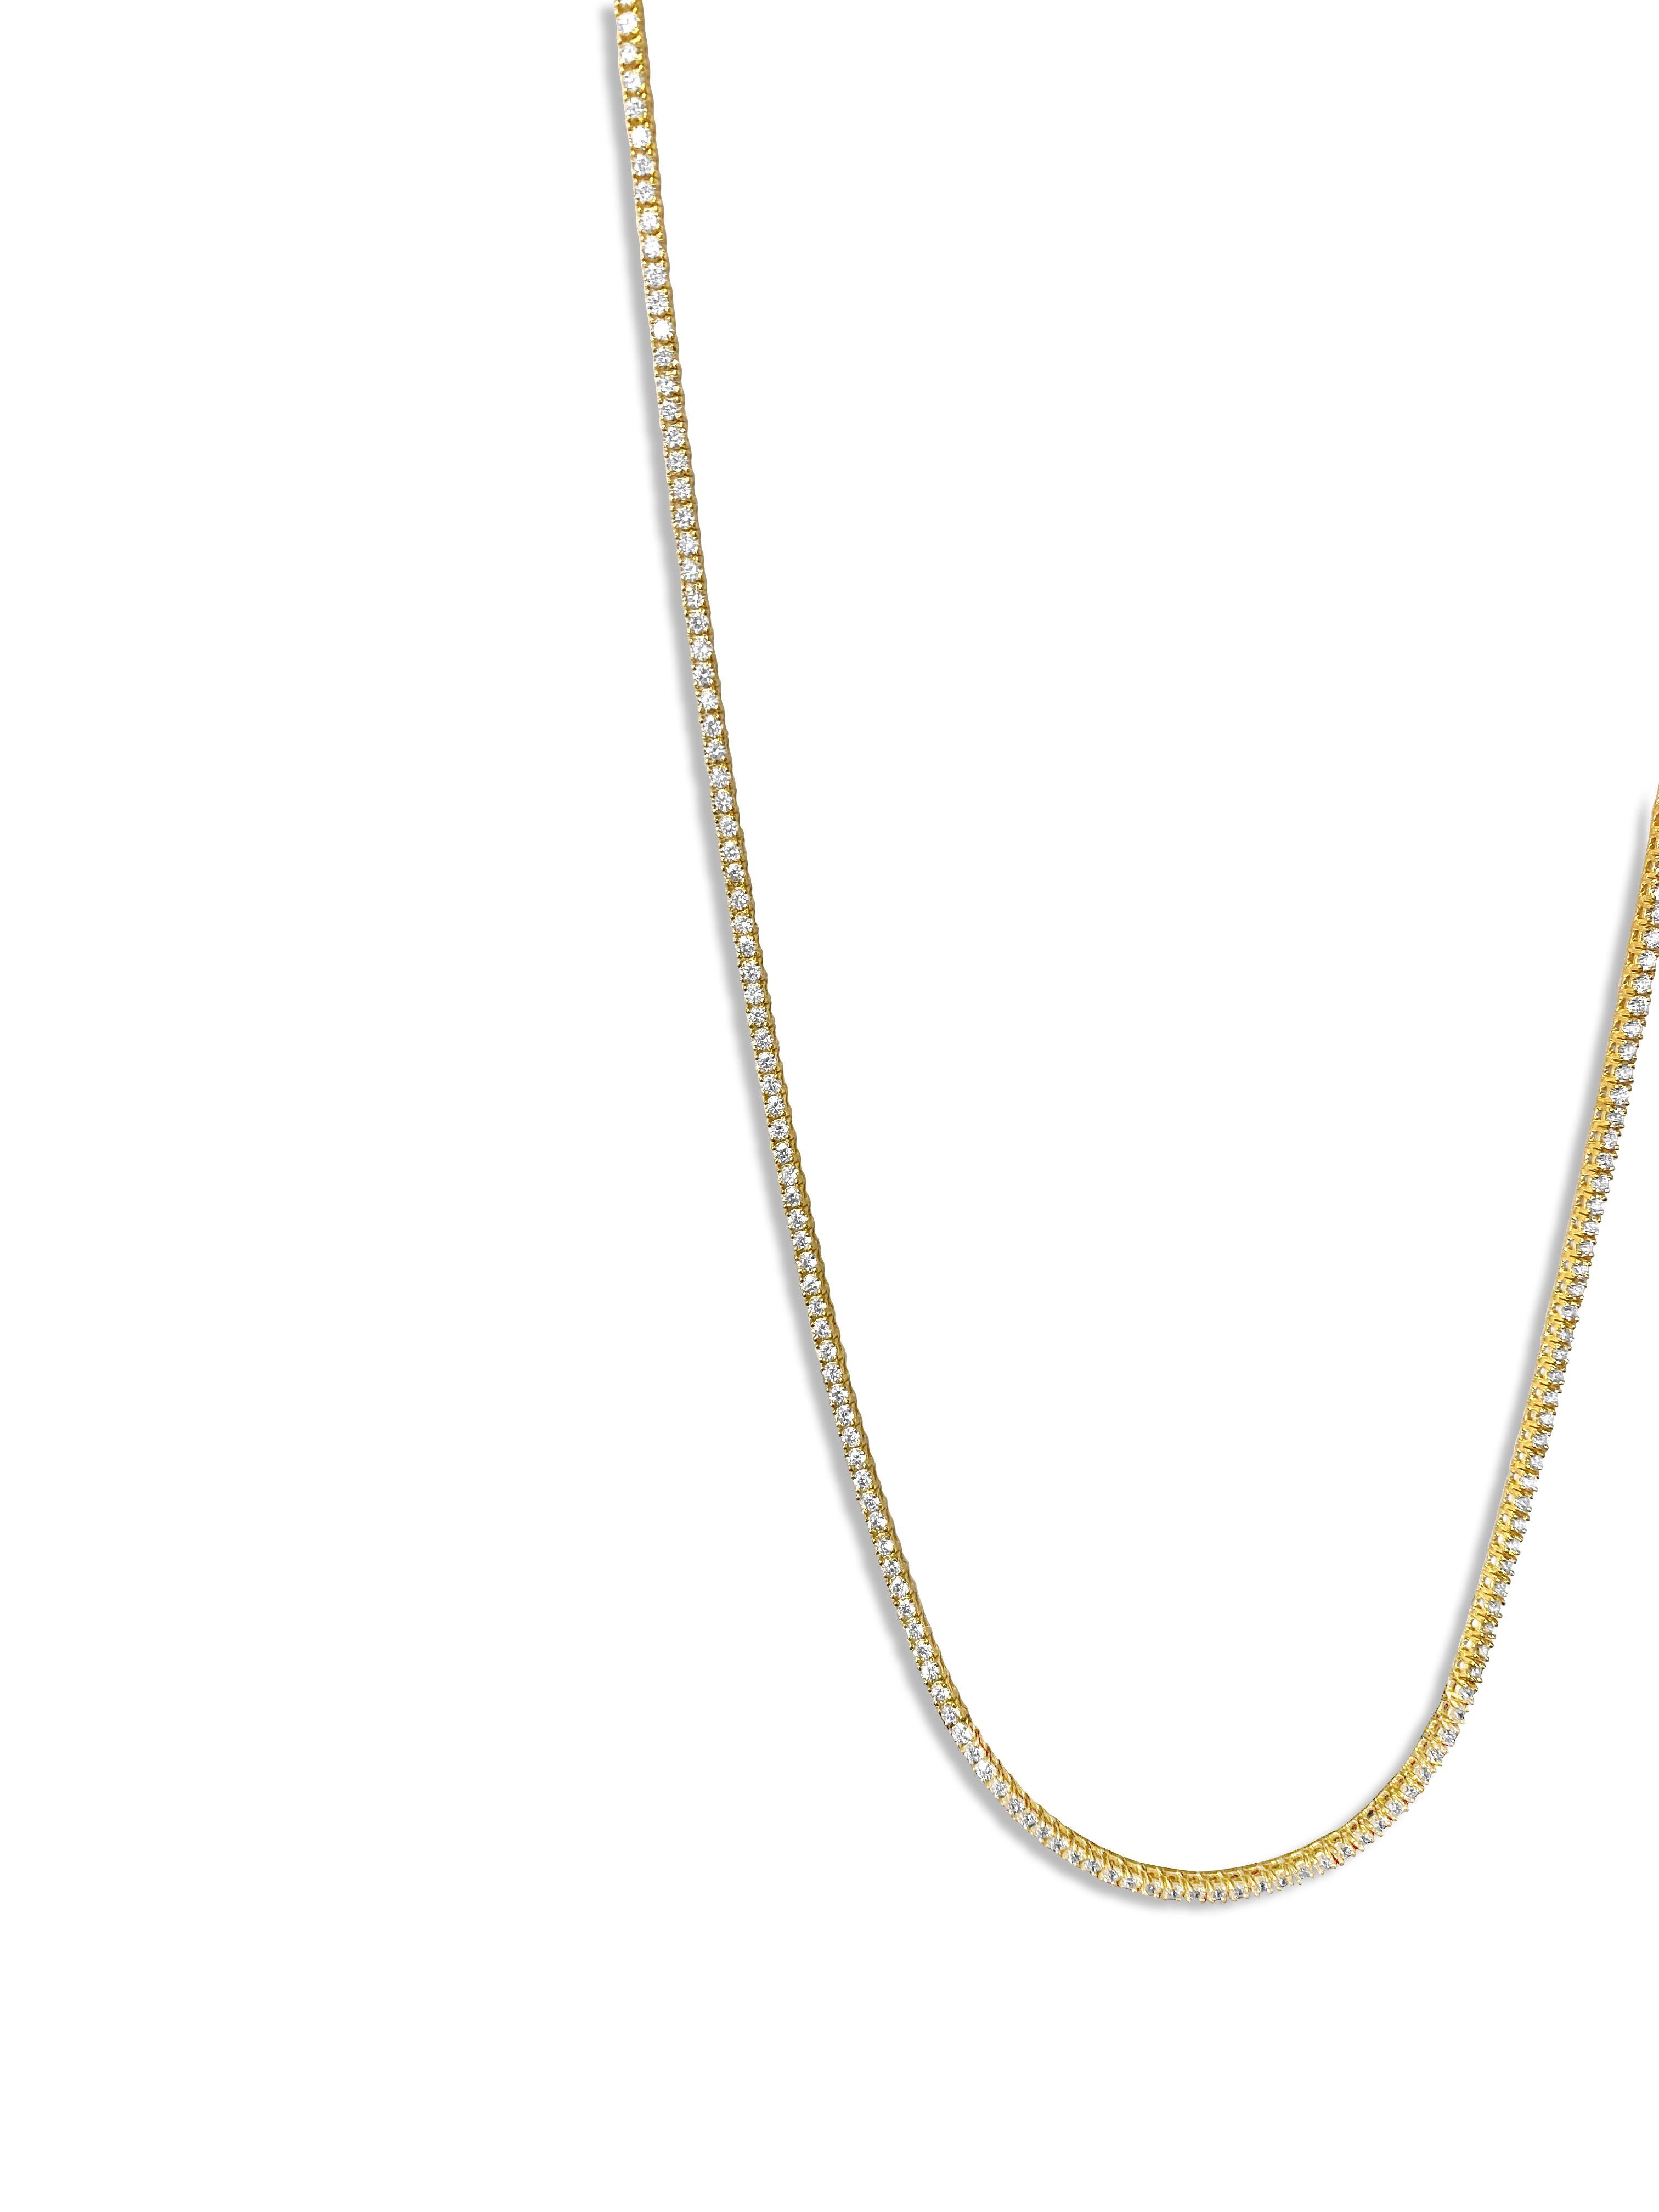 This necklace is made of 14-karat yellow gold. The diamonds on it weigh a total of 9 carats and have very high clarity (VVS-VS) and color (H). These diamonds are all-natural and mined from the earth. They are cut in a round brilliant style and set